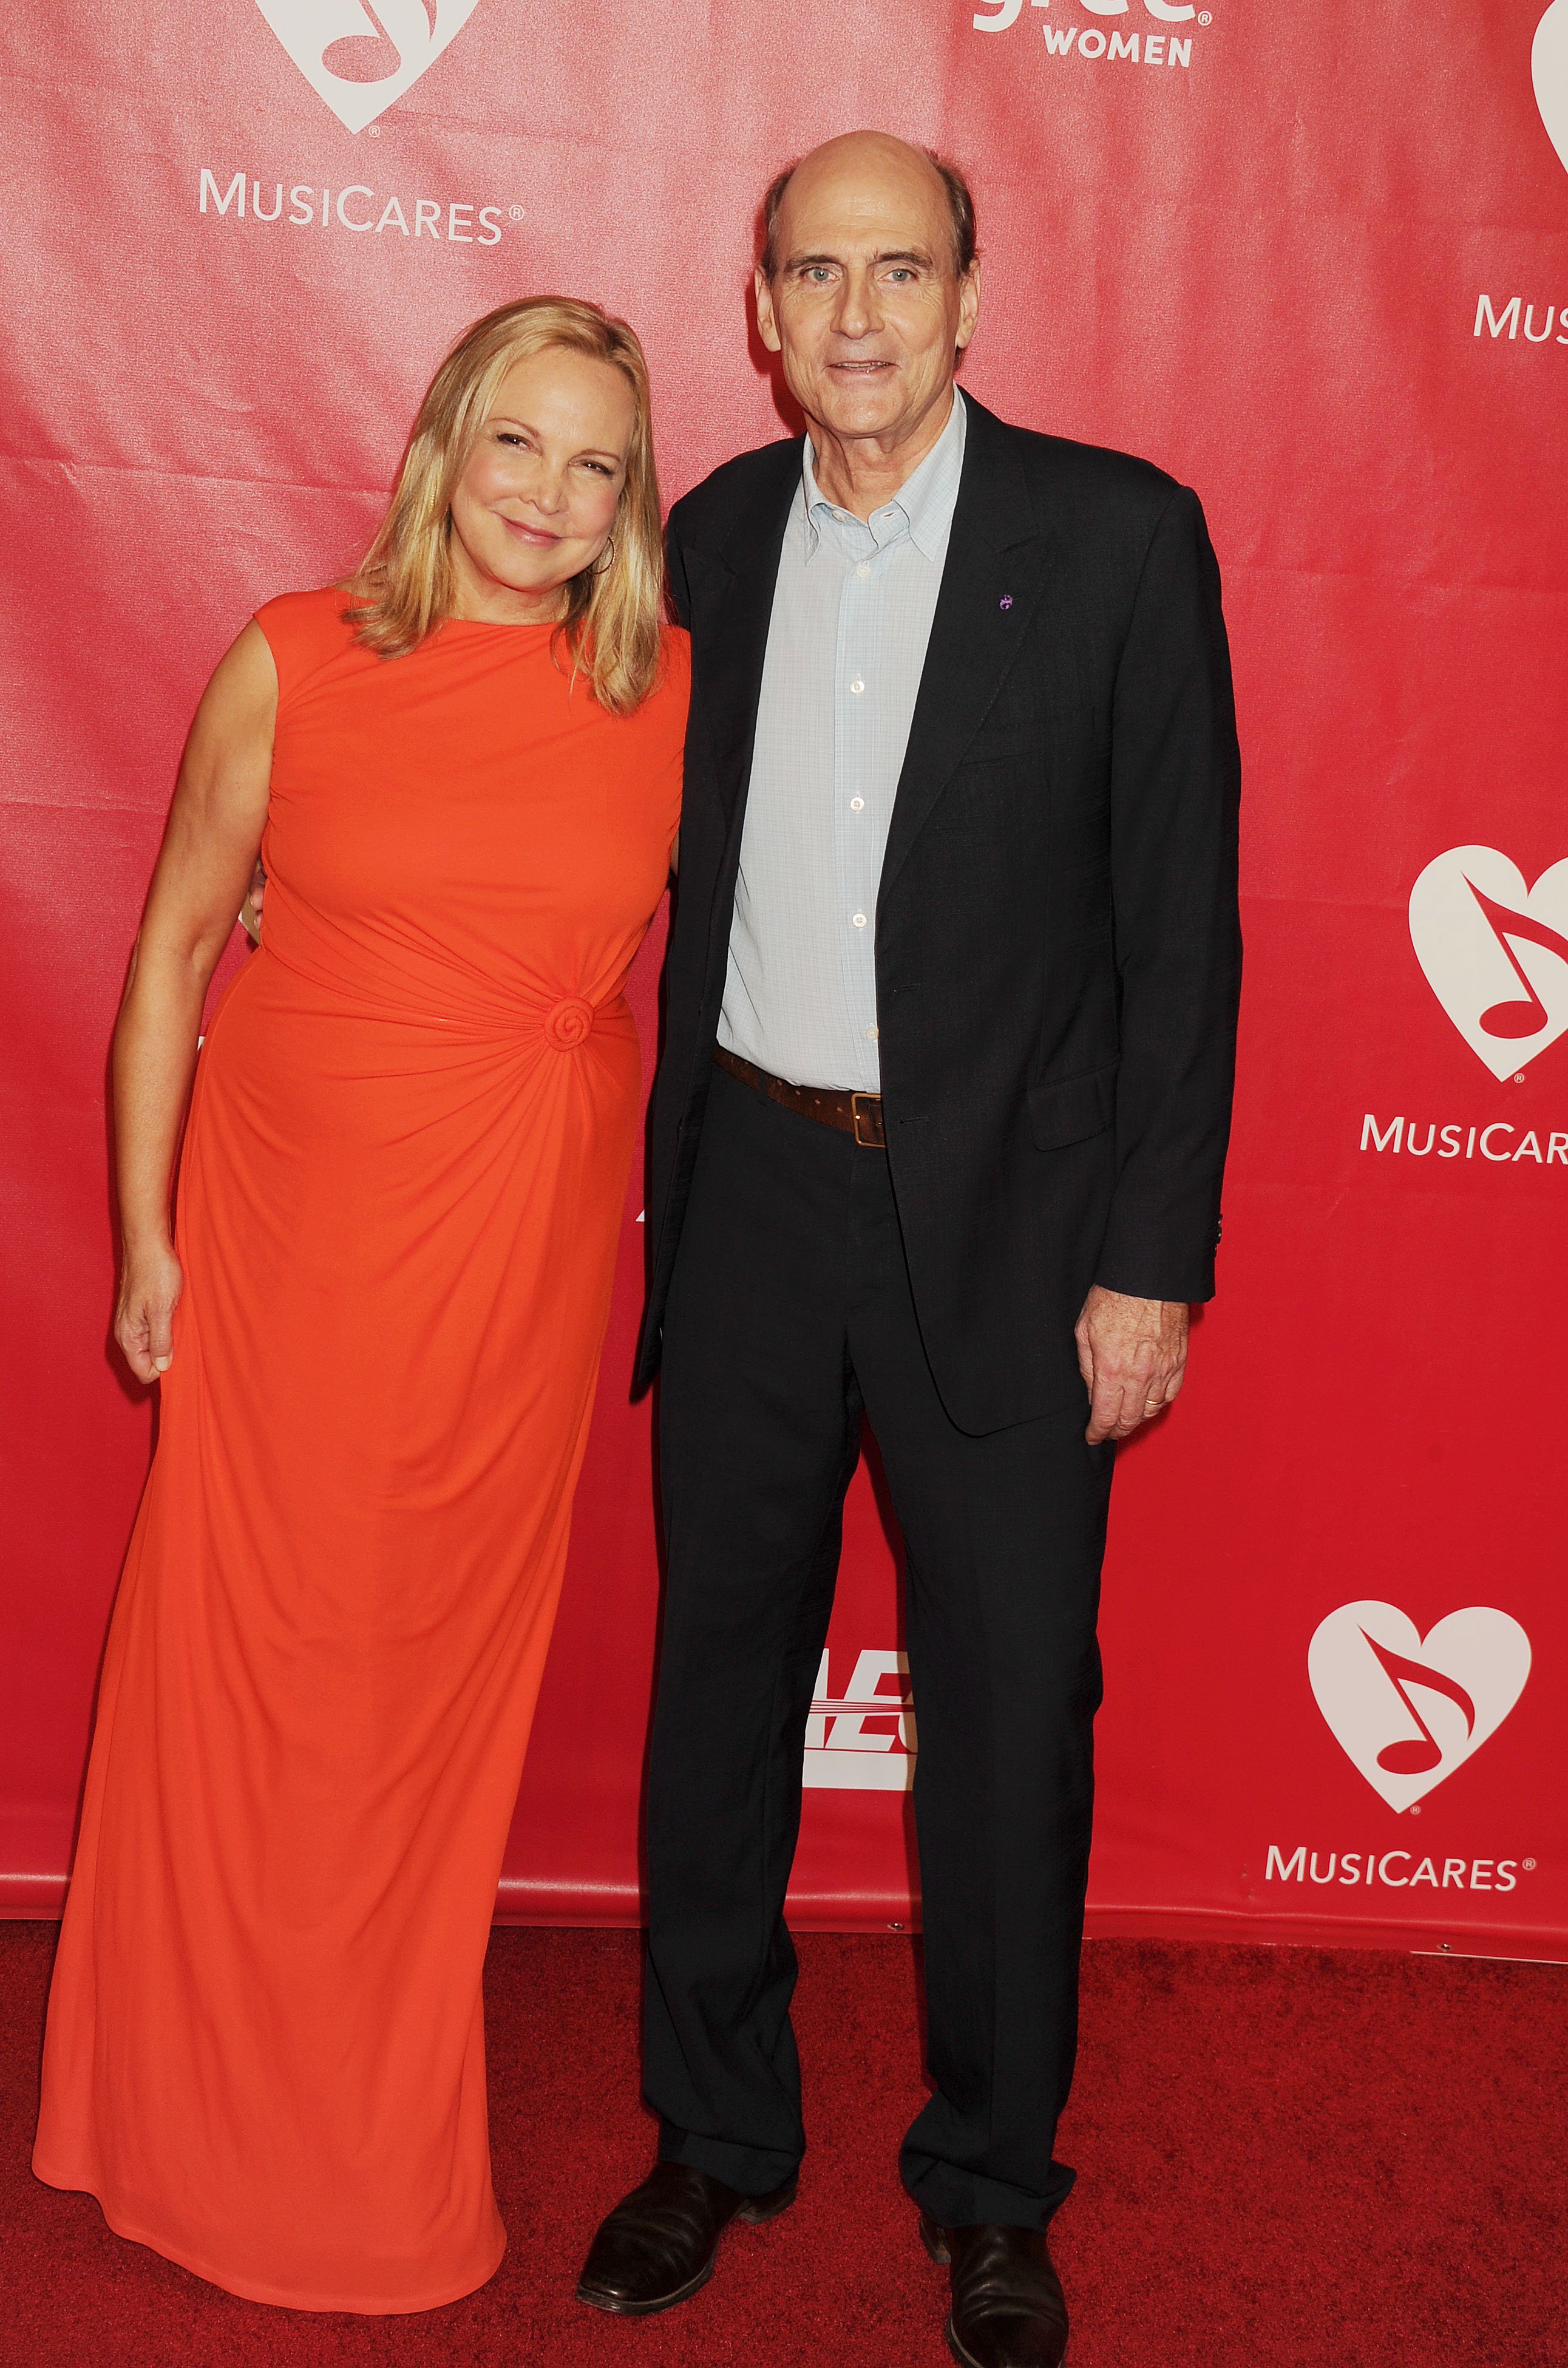 James Taylor and his wife, Caroline Smedvig, on April 17, 2014 in New York |  Source: Getty Images